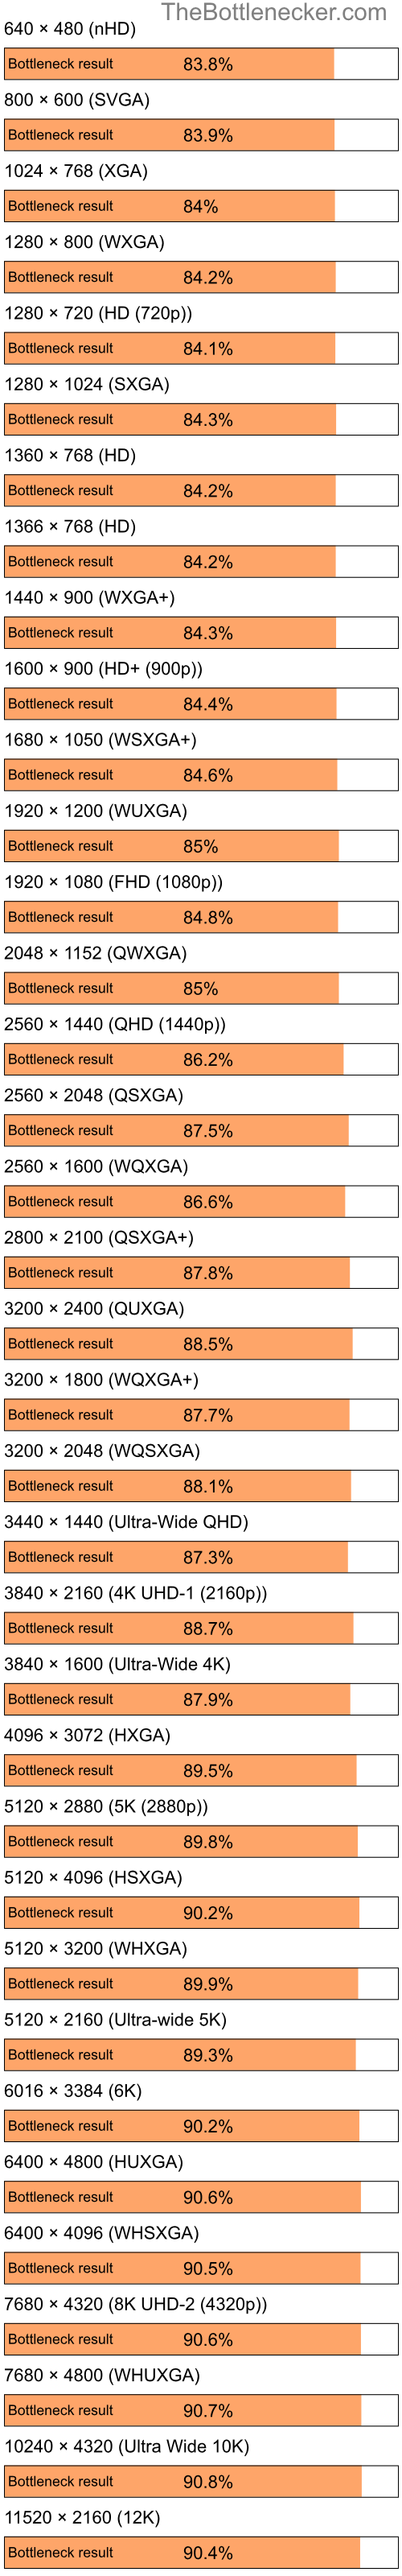 Bottleneck results by resolution for Intel Pentium 4 and NVIDIA GeForce Go 6150 in Graphic Card Intense Tasks